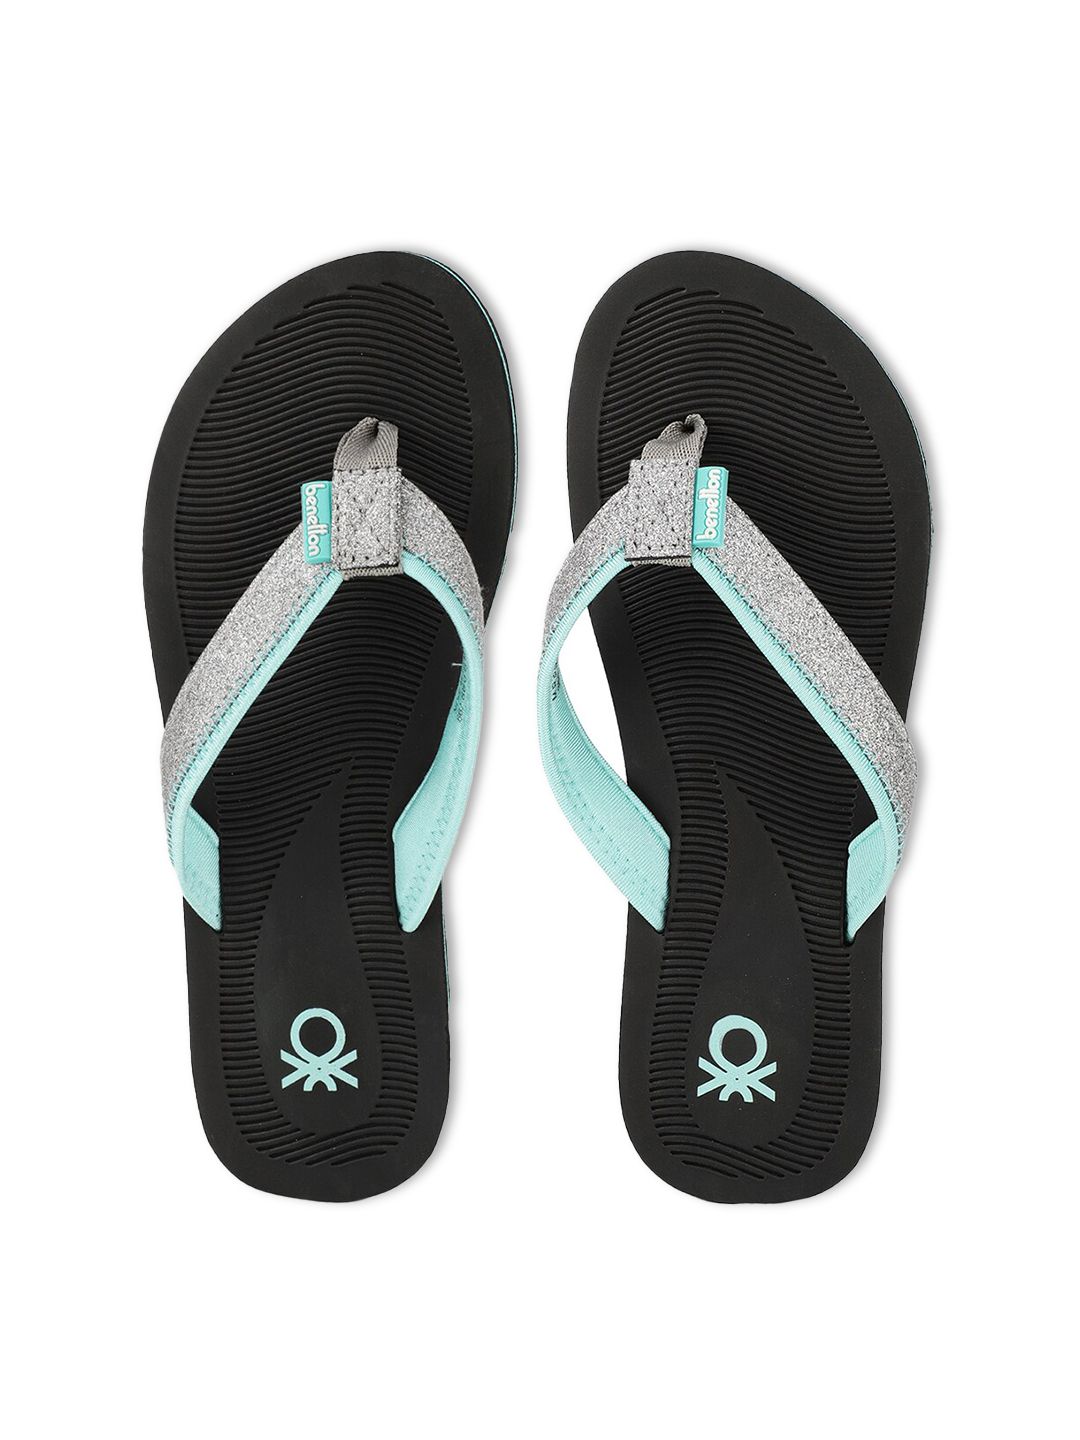 United Colors of Benetton Women Black & Turquoise Blue Rubber Thong Flip-Flops Price in India